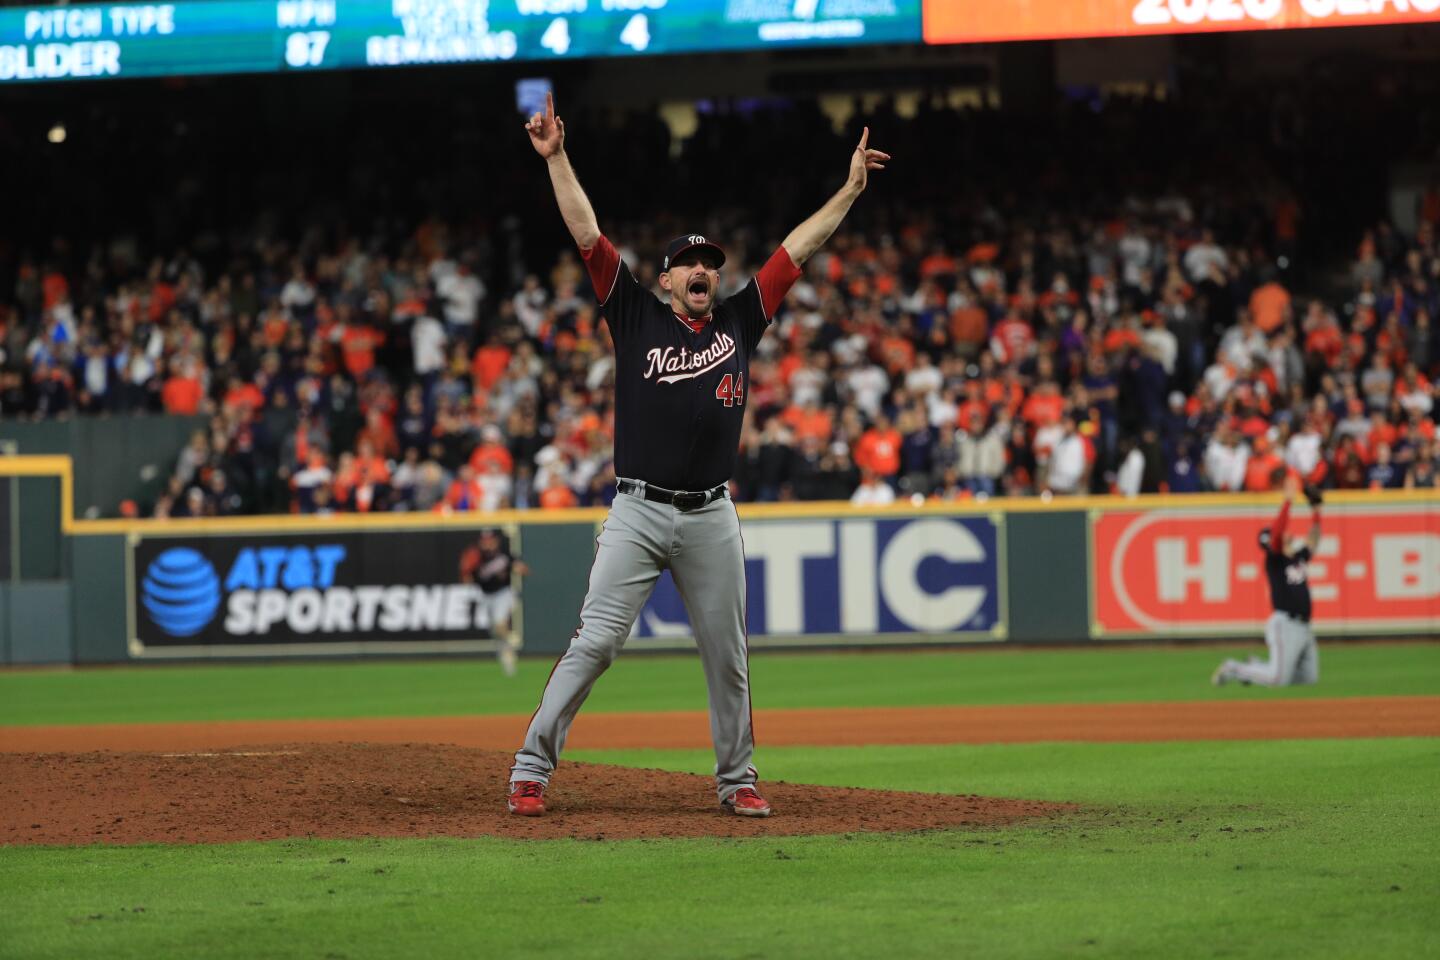 Pitcher Daniel Hudson celebrates after getting the last out of the World Series.